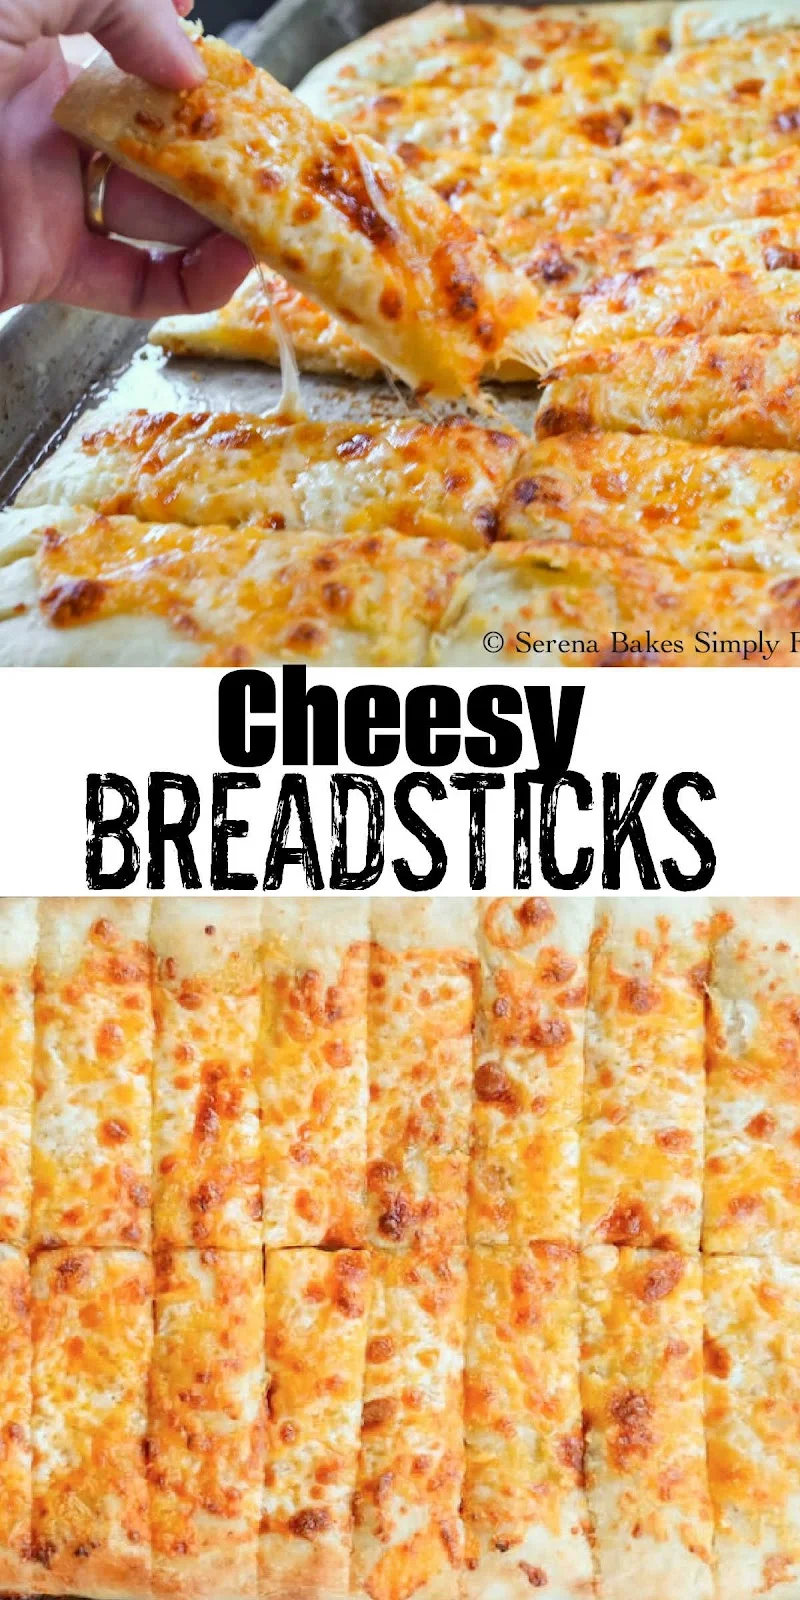 2 photos the top photo is of a hand pulling a Cheesy Breadstick. The bottom photo is of a pan of Cheesy Breadsticks. There is a white banner between the two photos with black text Cheesy Breadsticks.